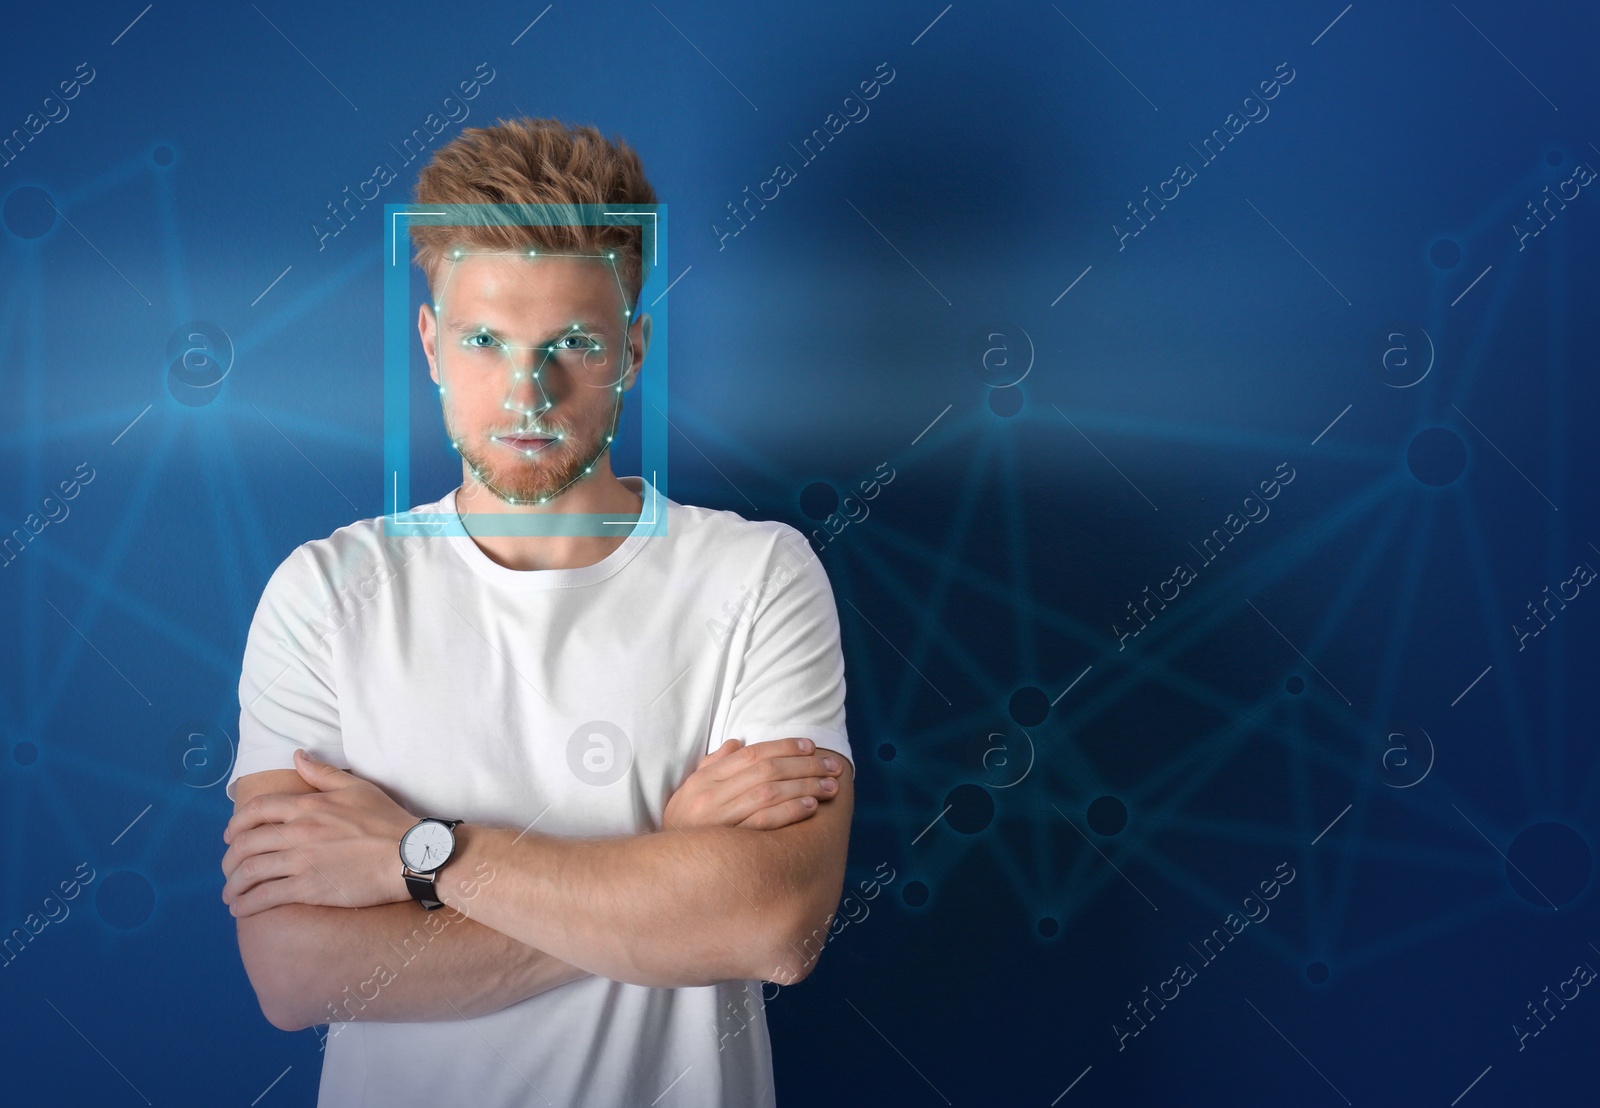 Image of Facial recognition system. Young man with scanner frame and digital biometric grid on blue background